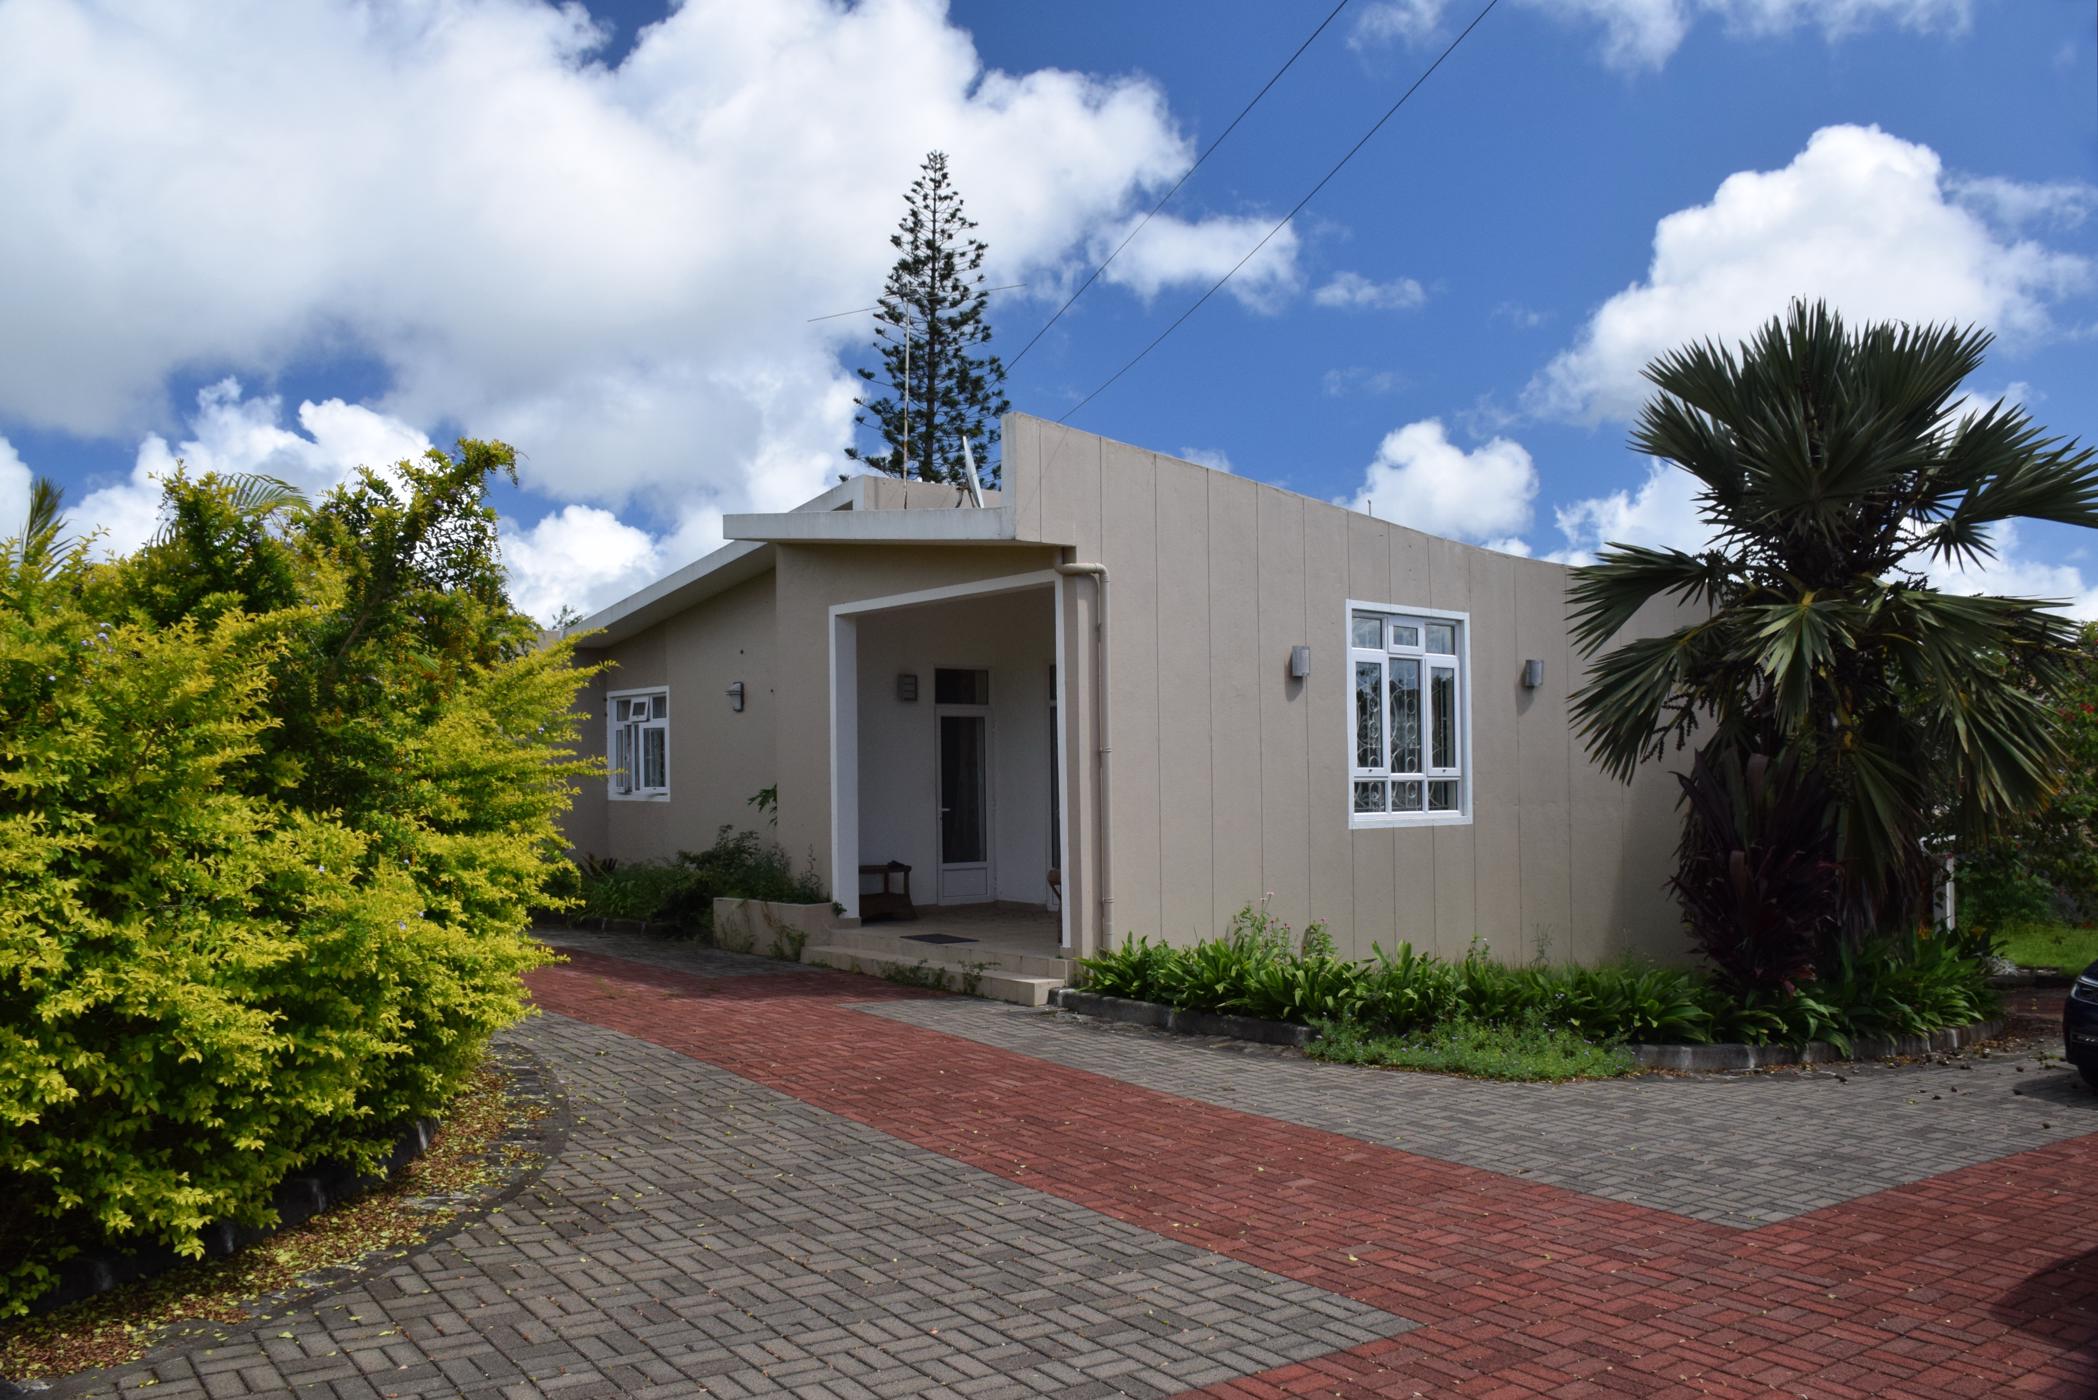 3 bedroom house for sale in Floreal (Mauritius)